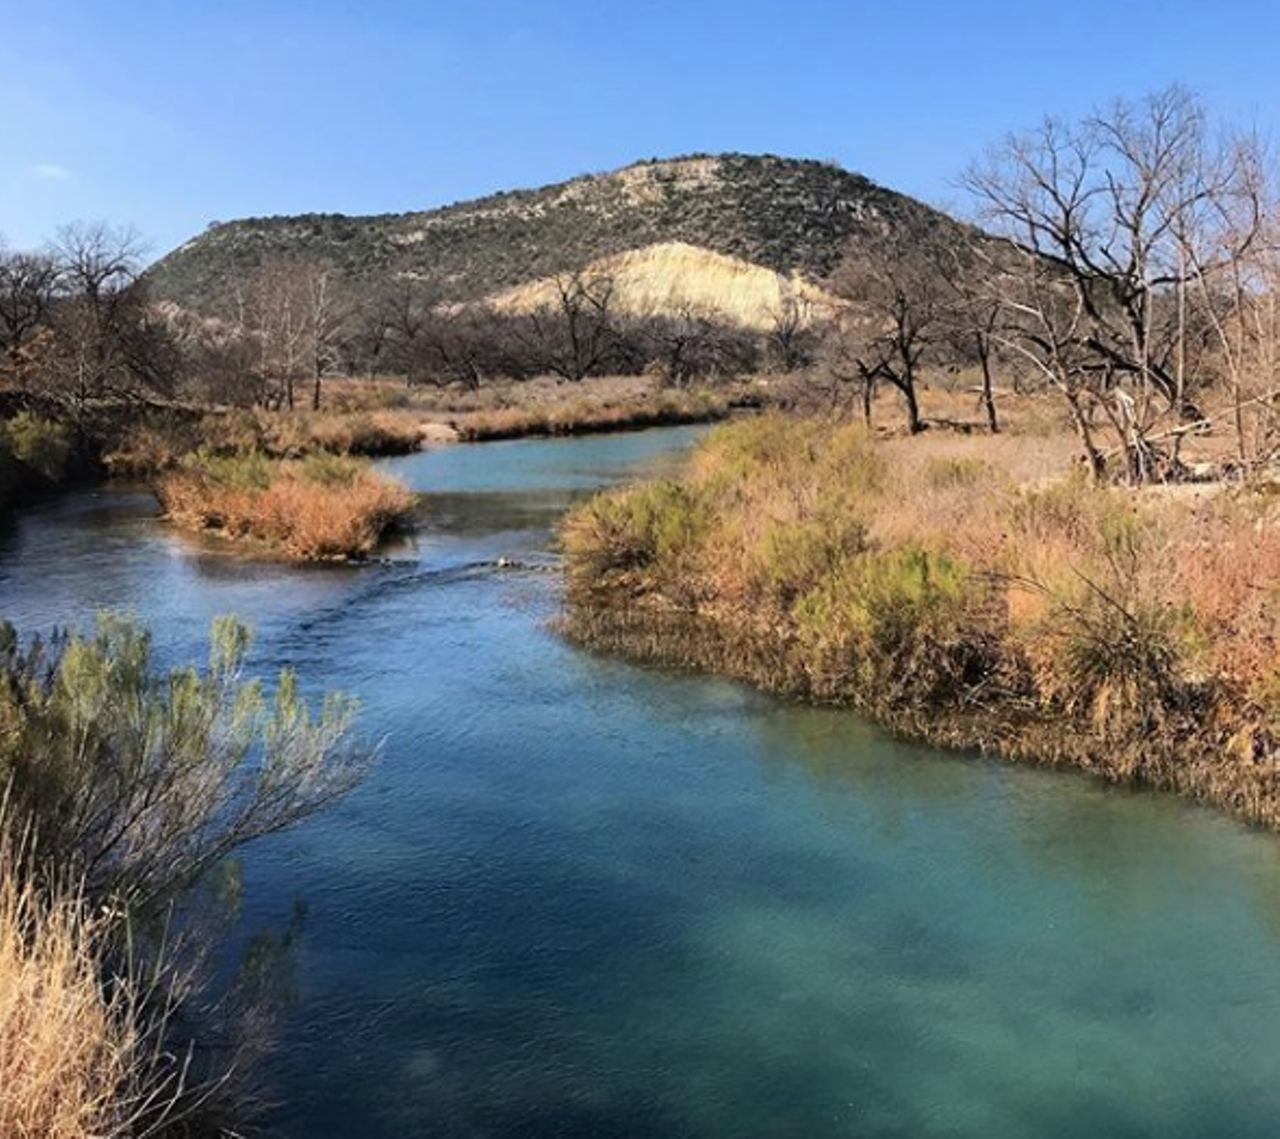 South Llano River
1927 Park Rd 73, Junction, tpwd.texas.gov
Photo via Instagram / brooke.a.simmons